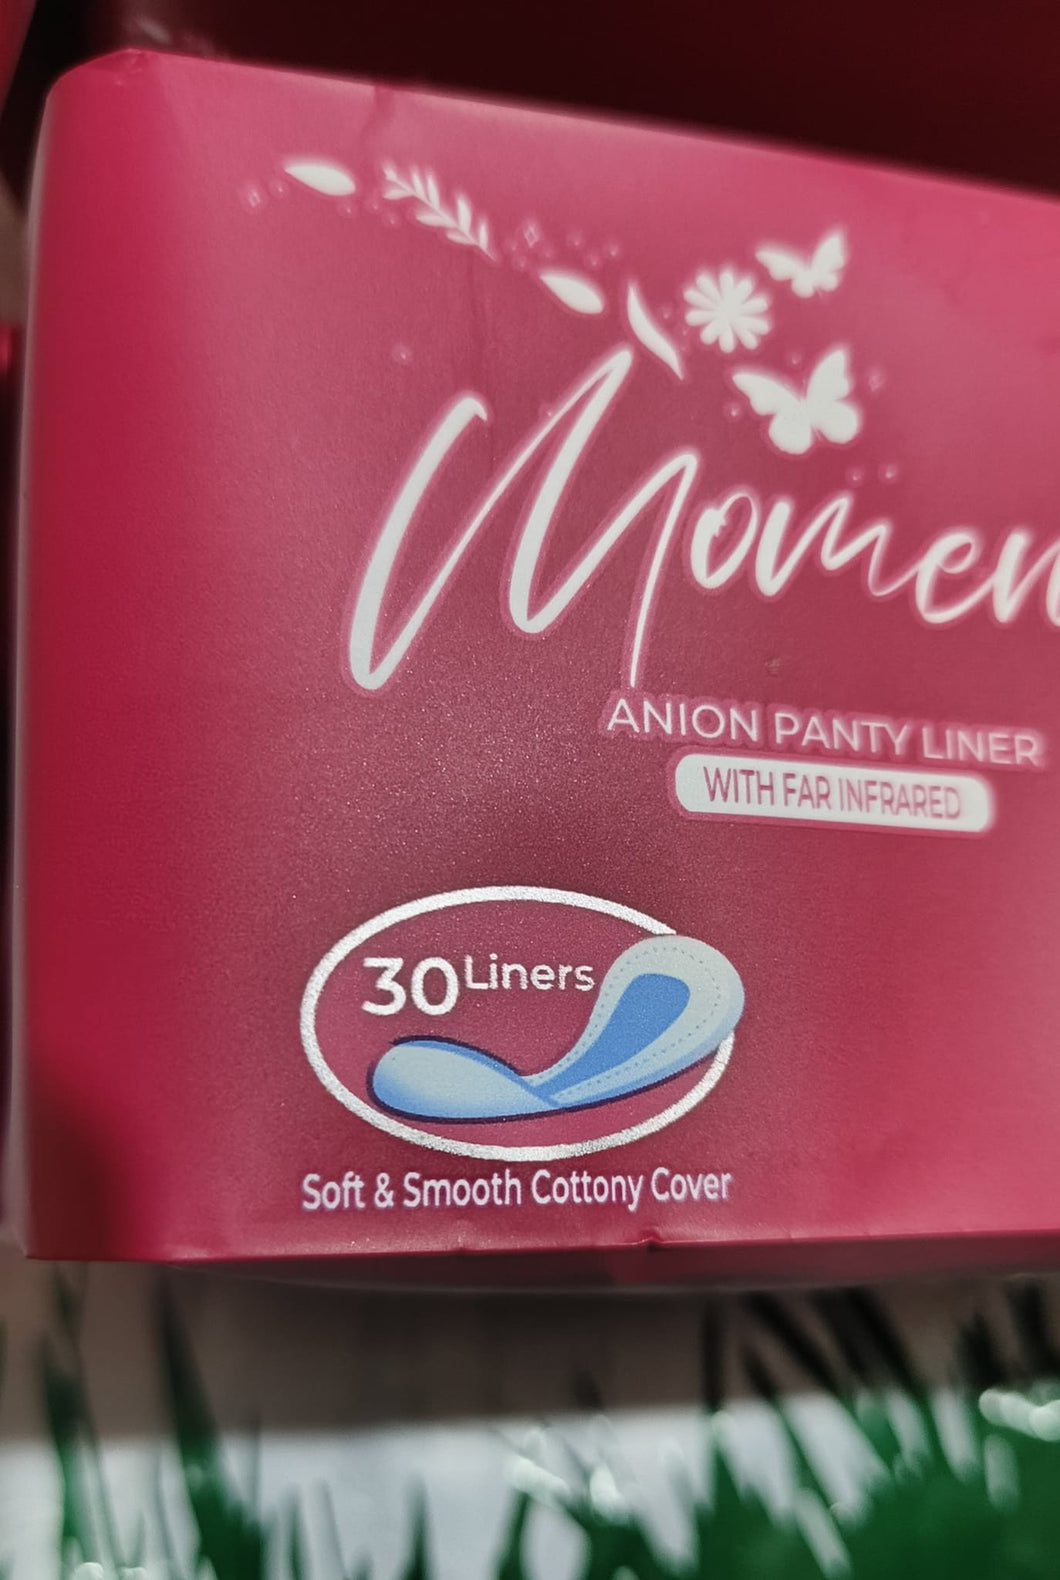 Moments Pantyliners (FAR INFRARED AND ANION FIBRE)